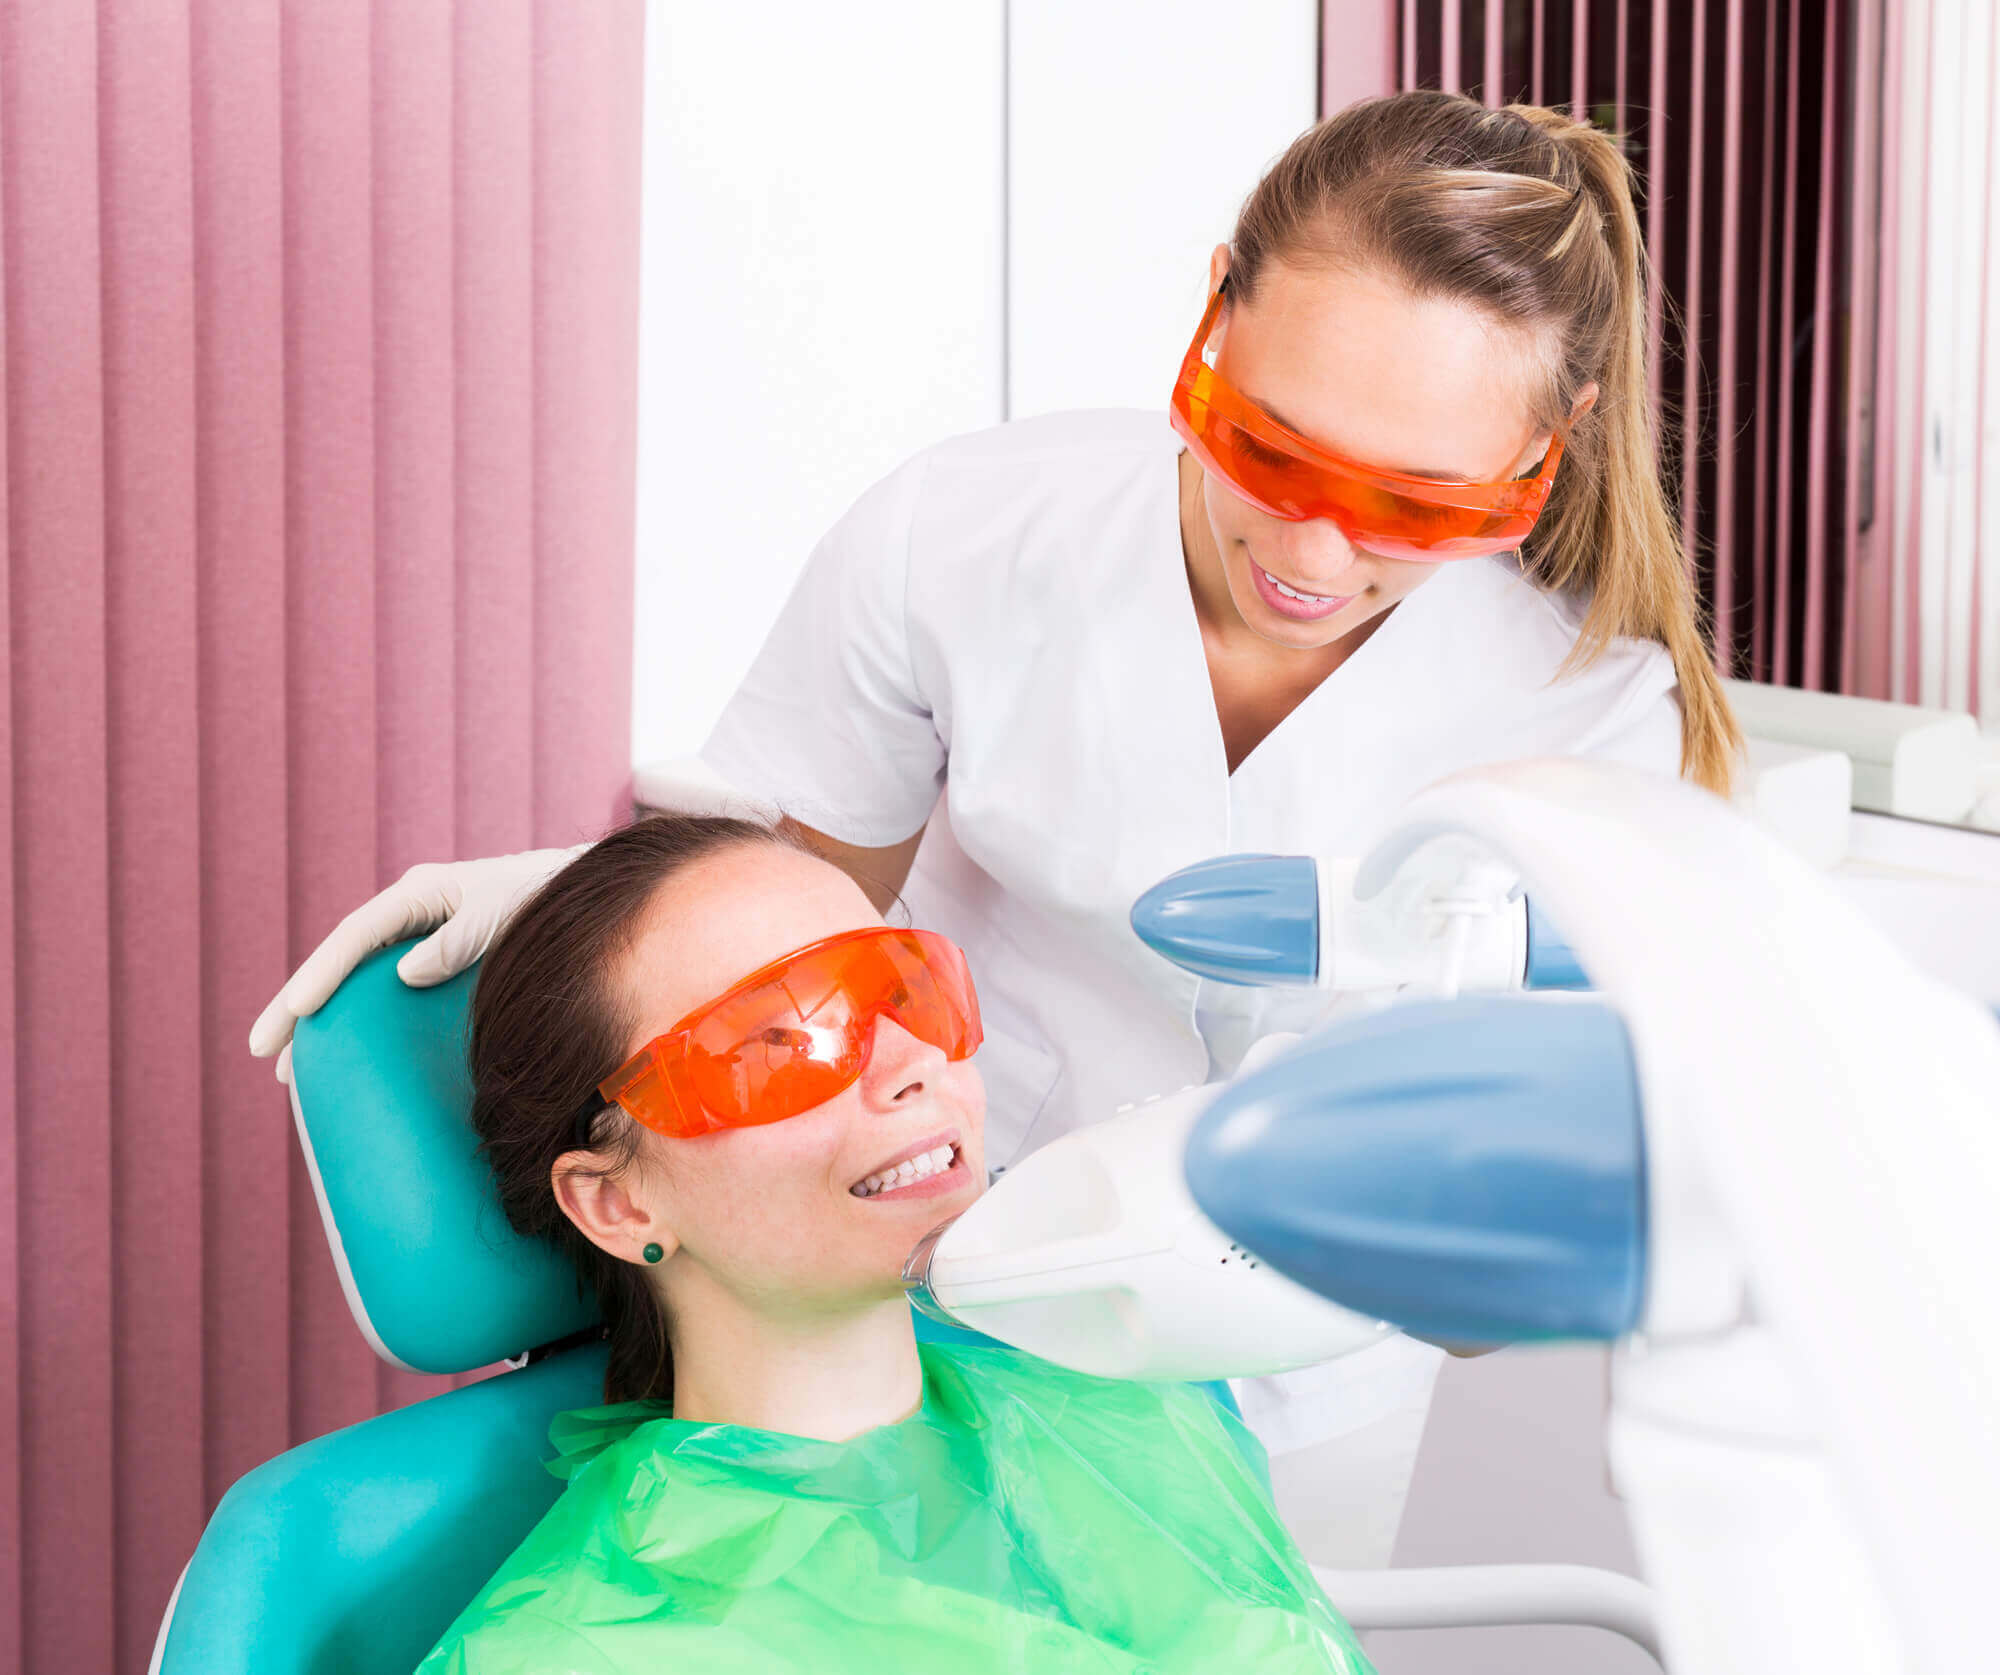 Laser Periodontal Therapy